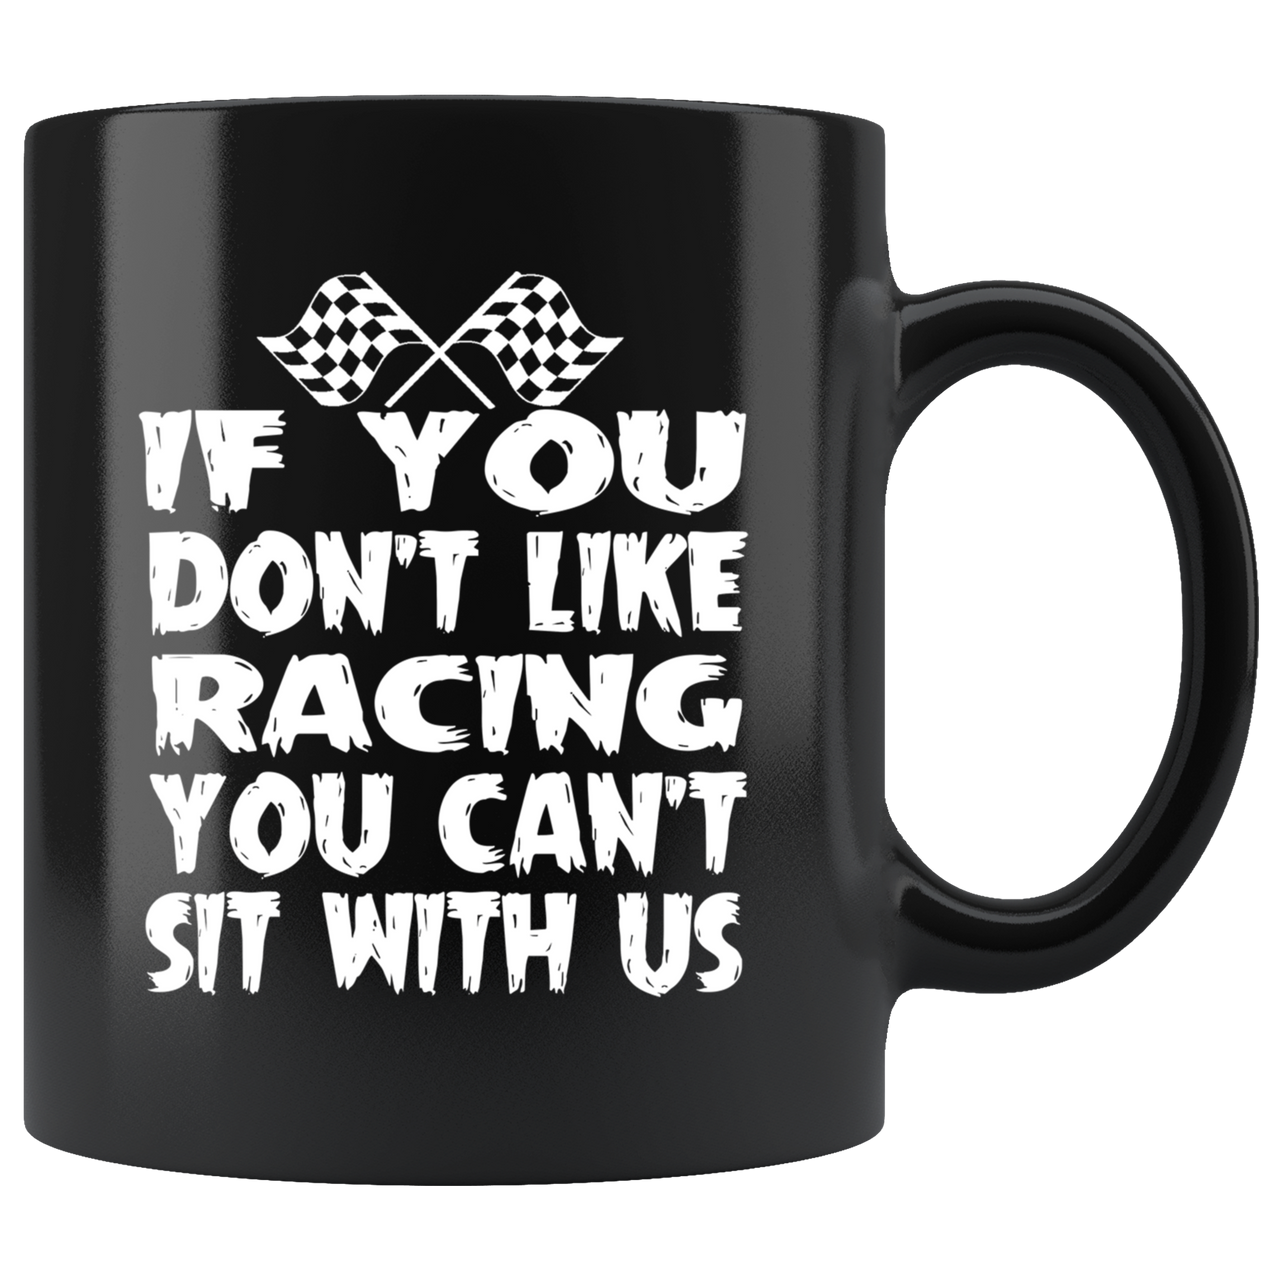 If You Don't Like Racing You Can't Sit With Us V1 Mug!